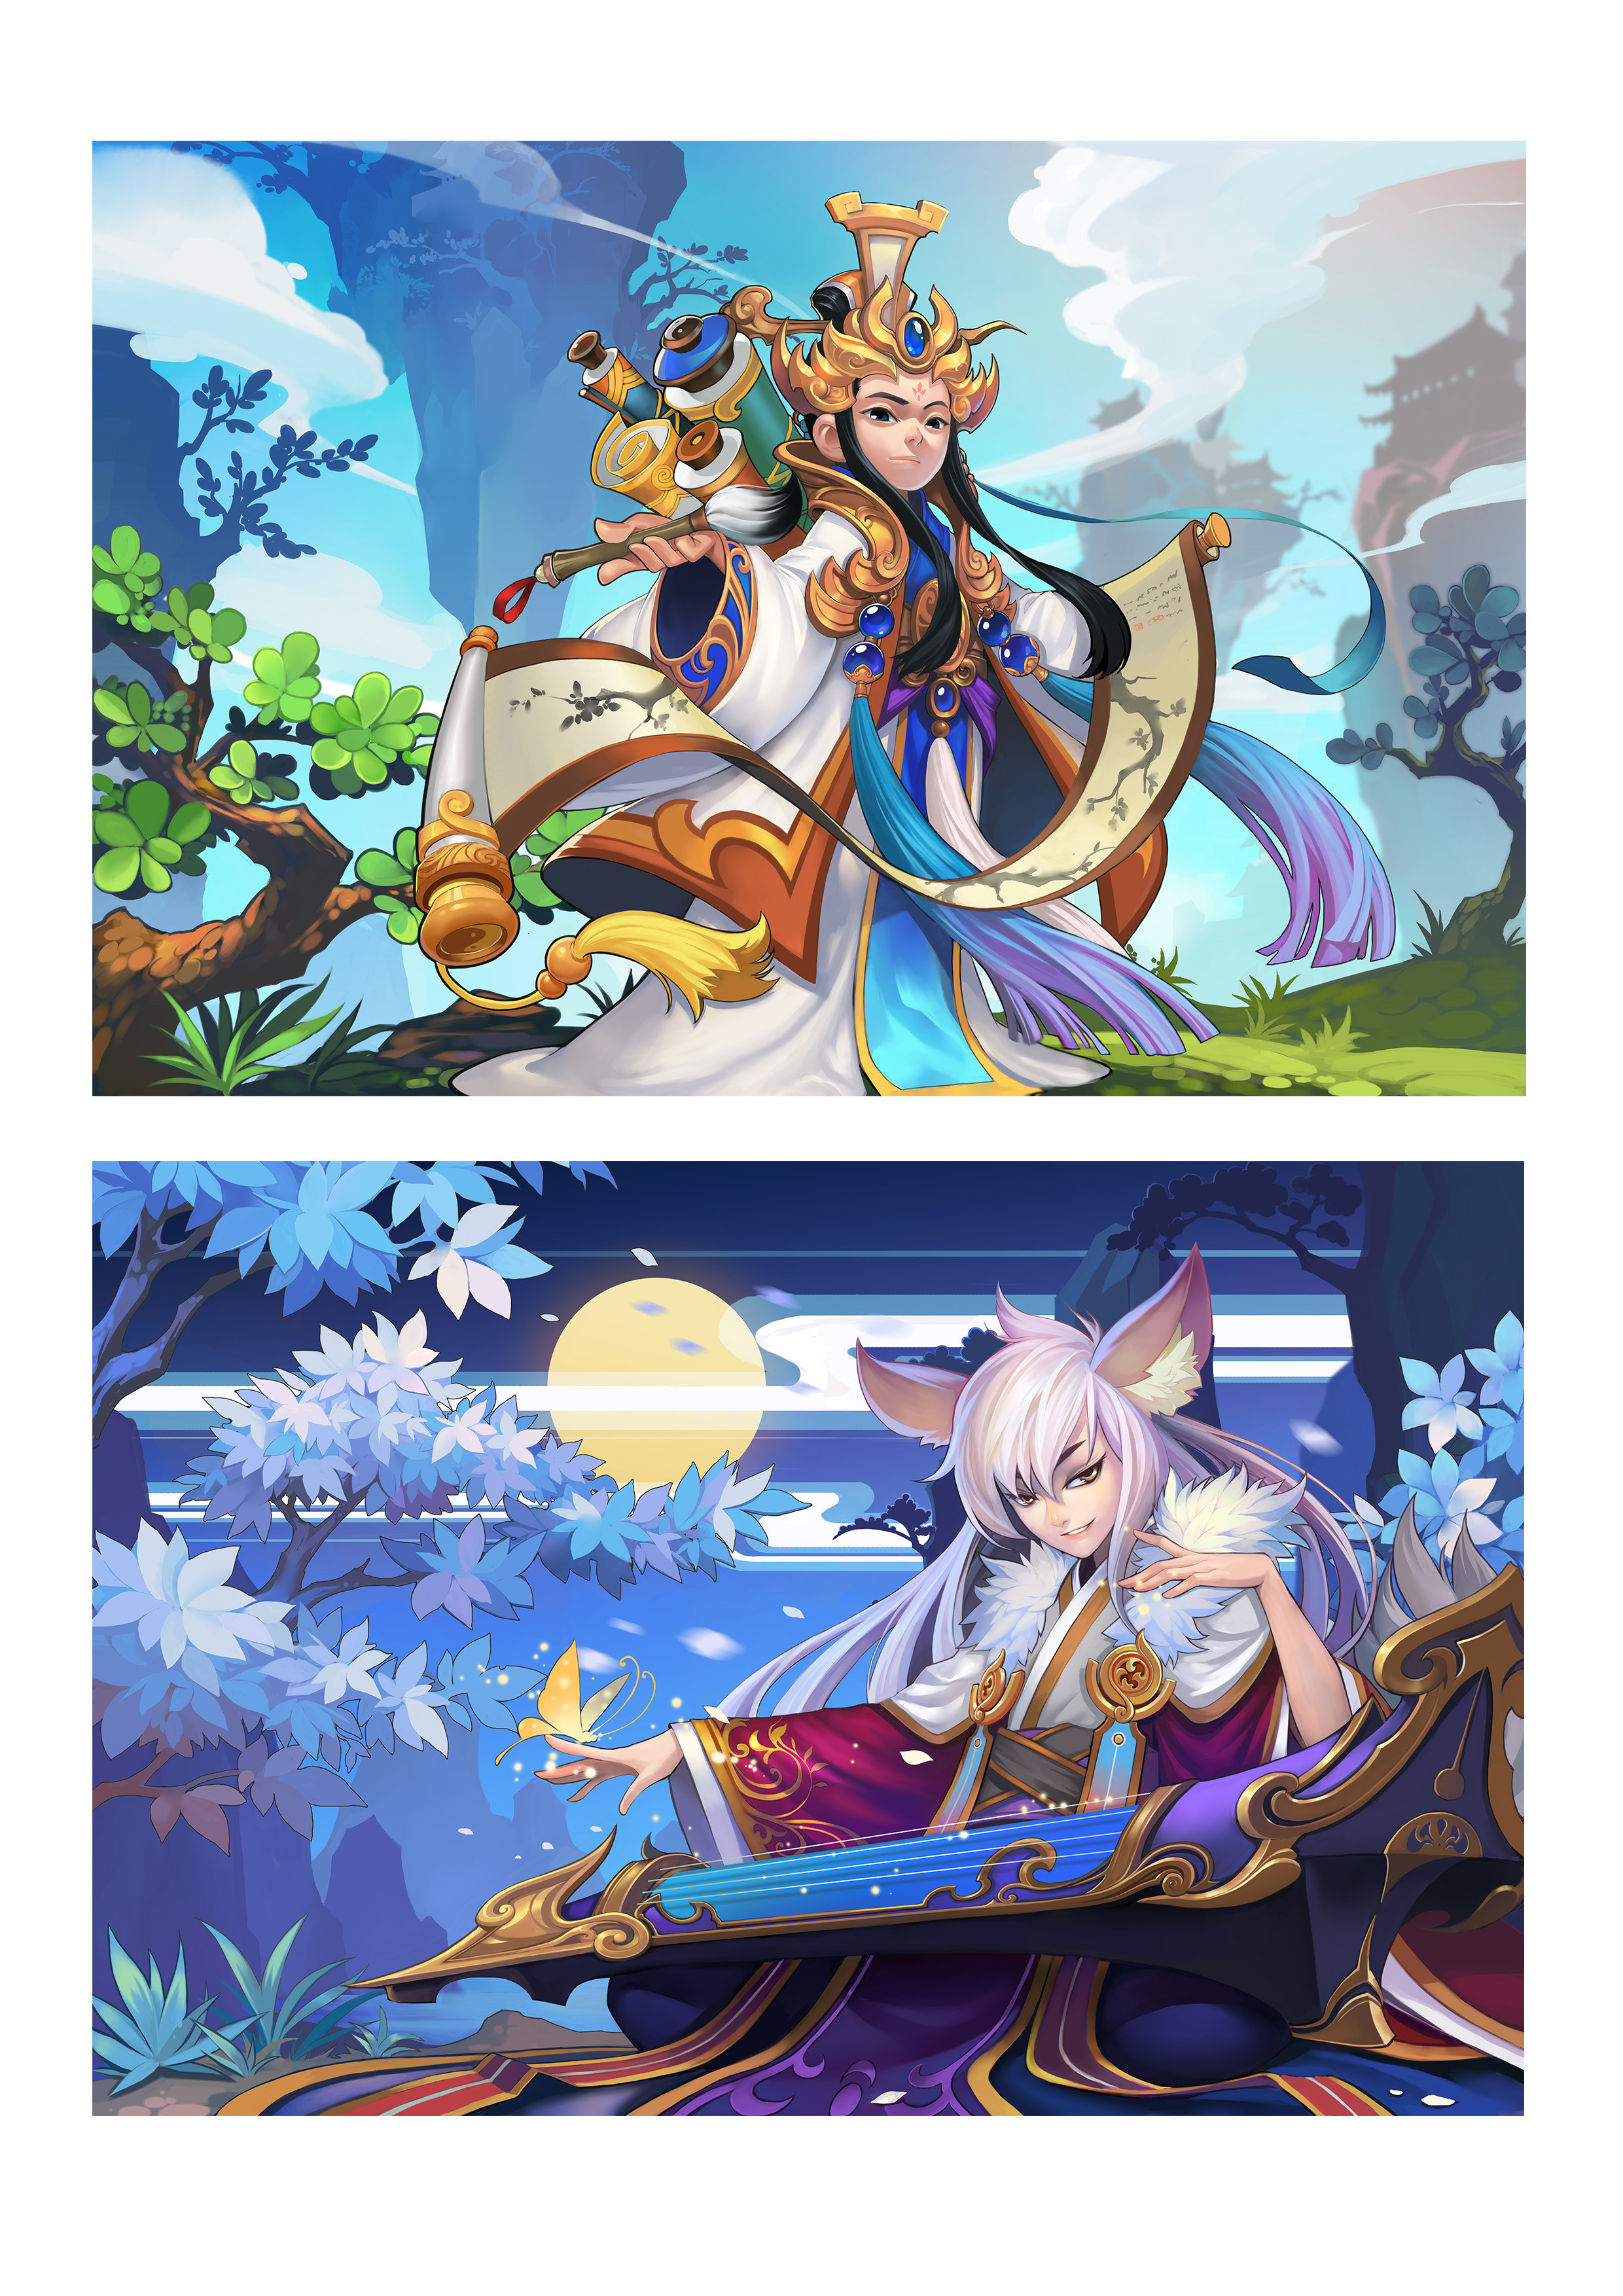 Illustrations for Tencent Game